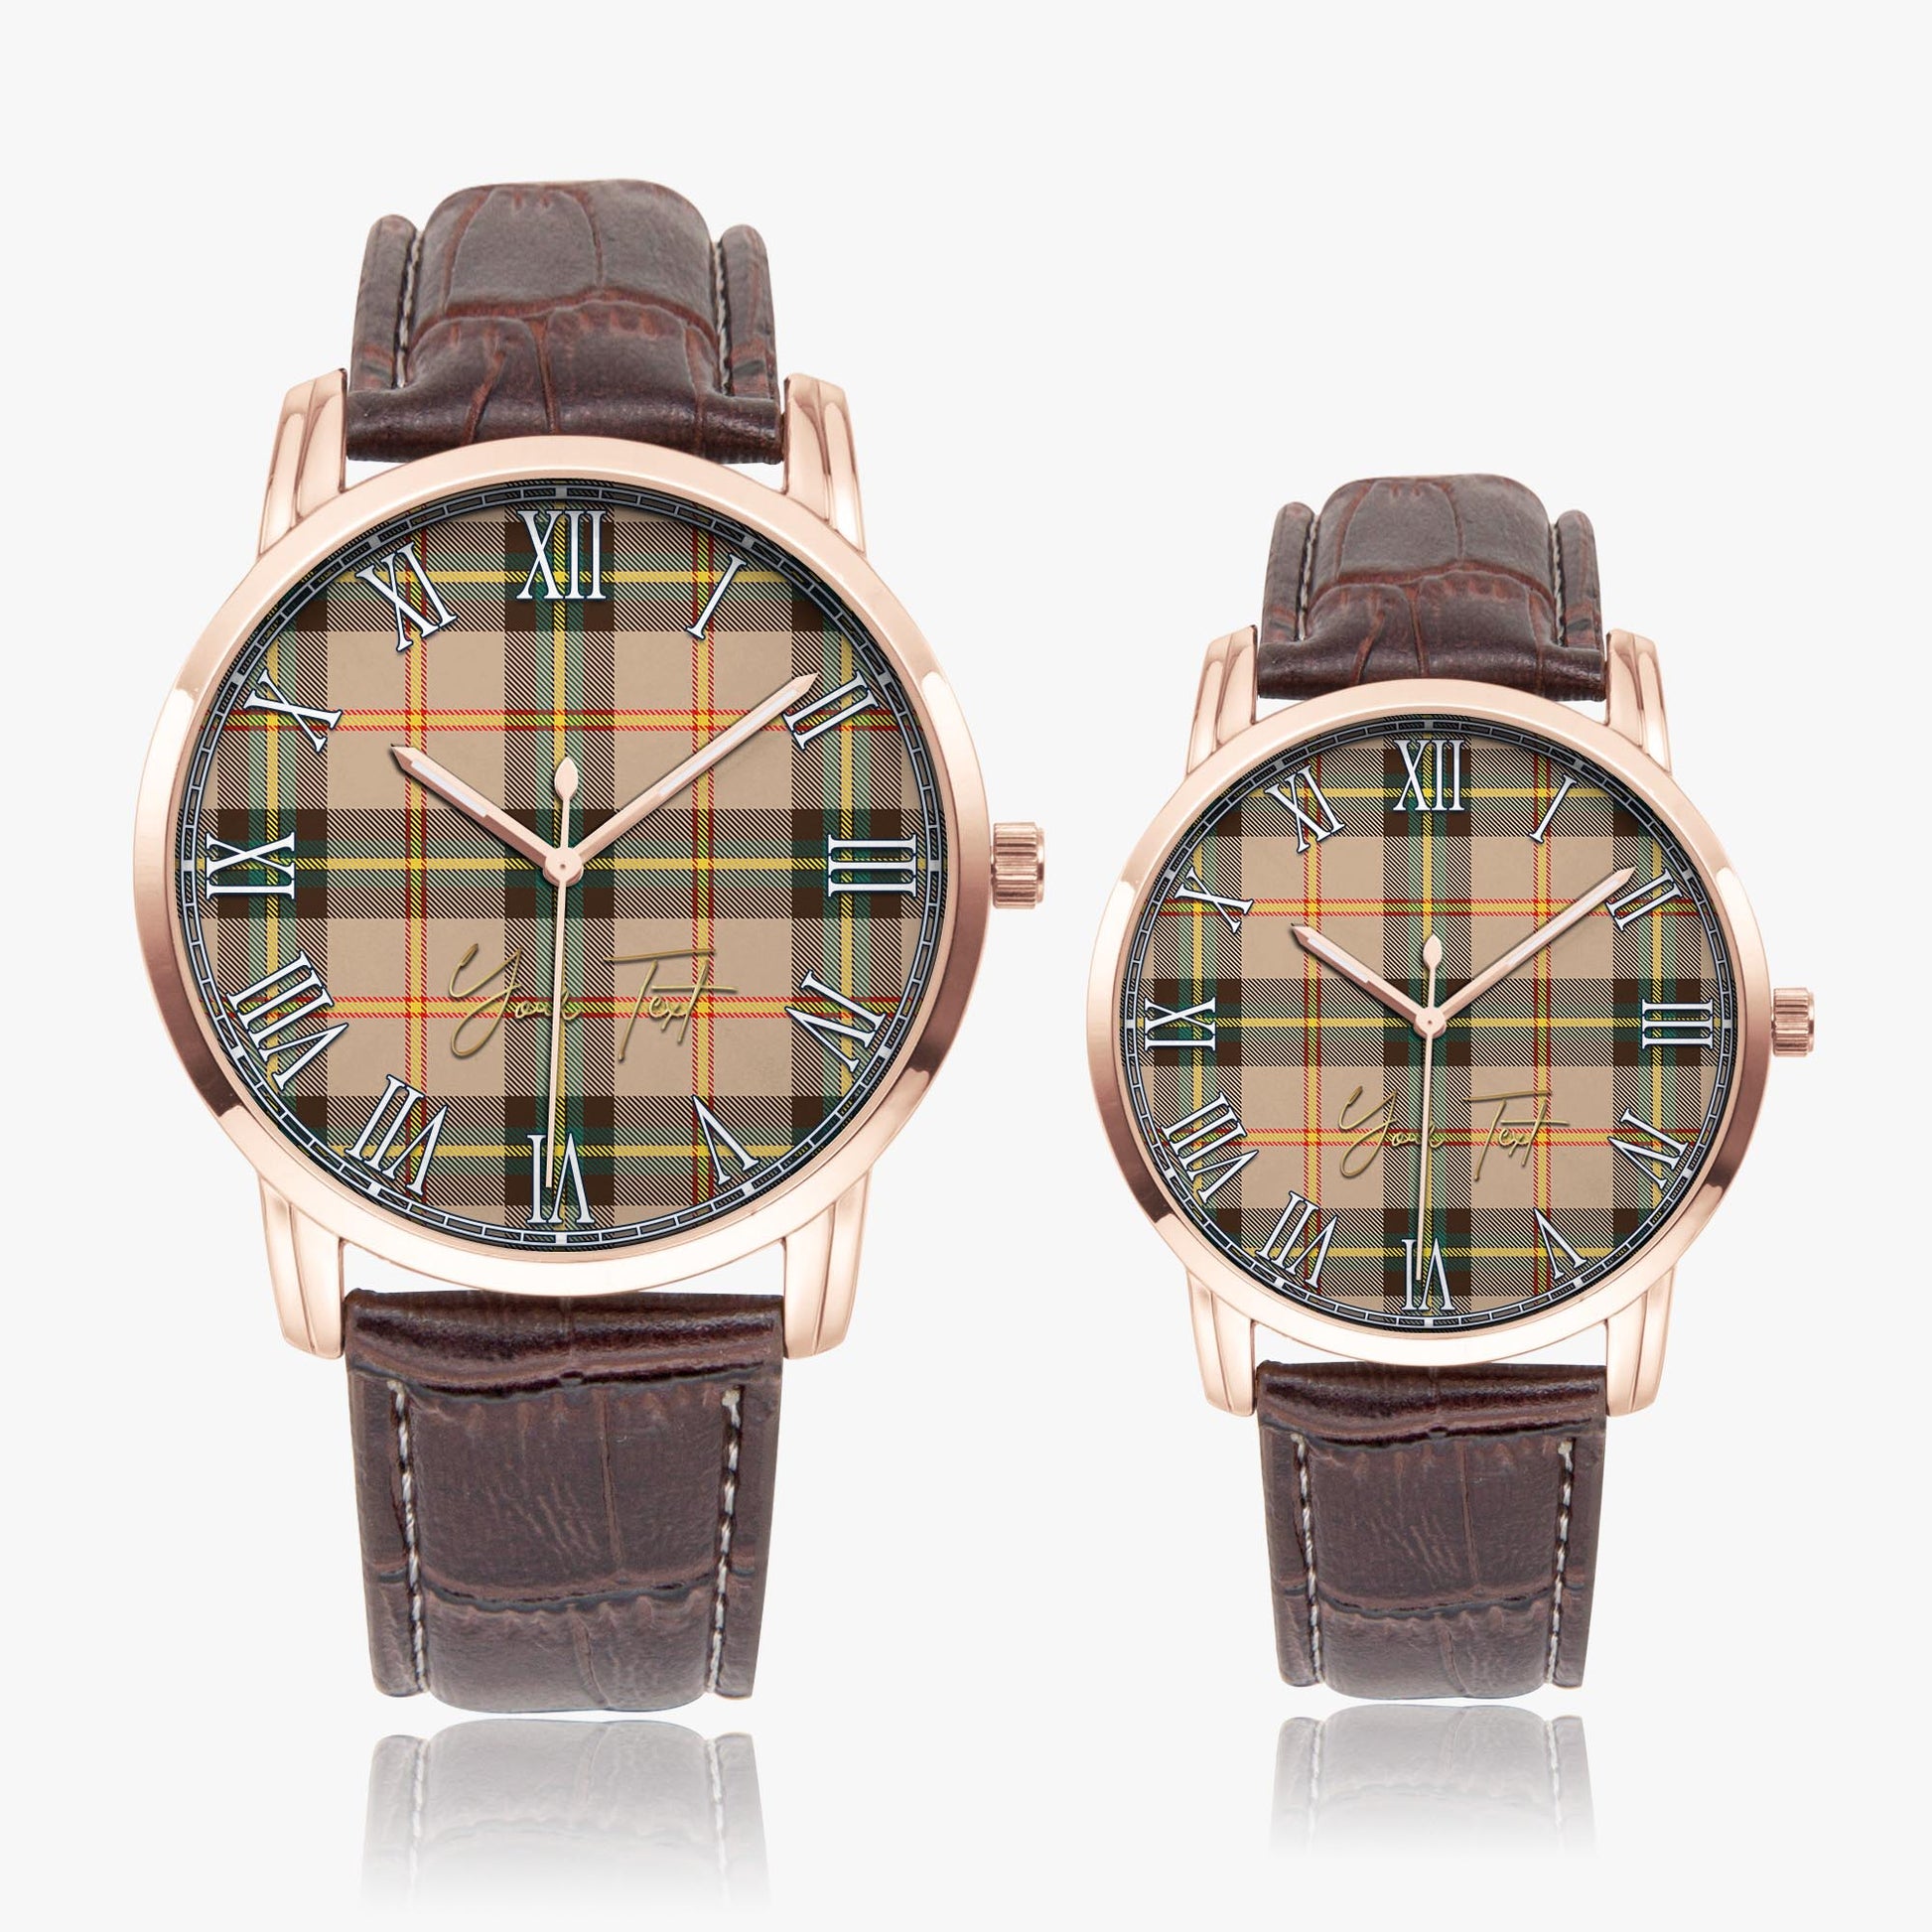 Saskatchewan Province Canada Tartan Personalized Your Text Leather Trap Quartz Watch Wide Type Rose Gold Case With Brown Leather Strap - Tartanvibesclothing